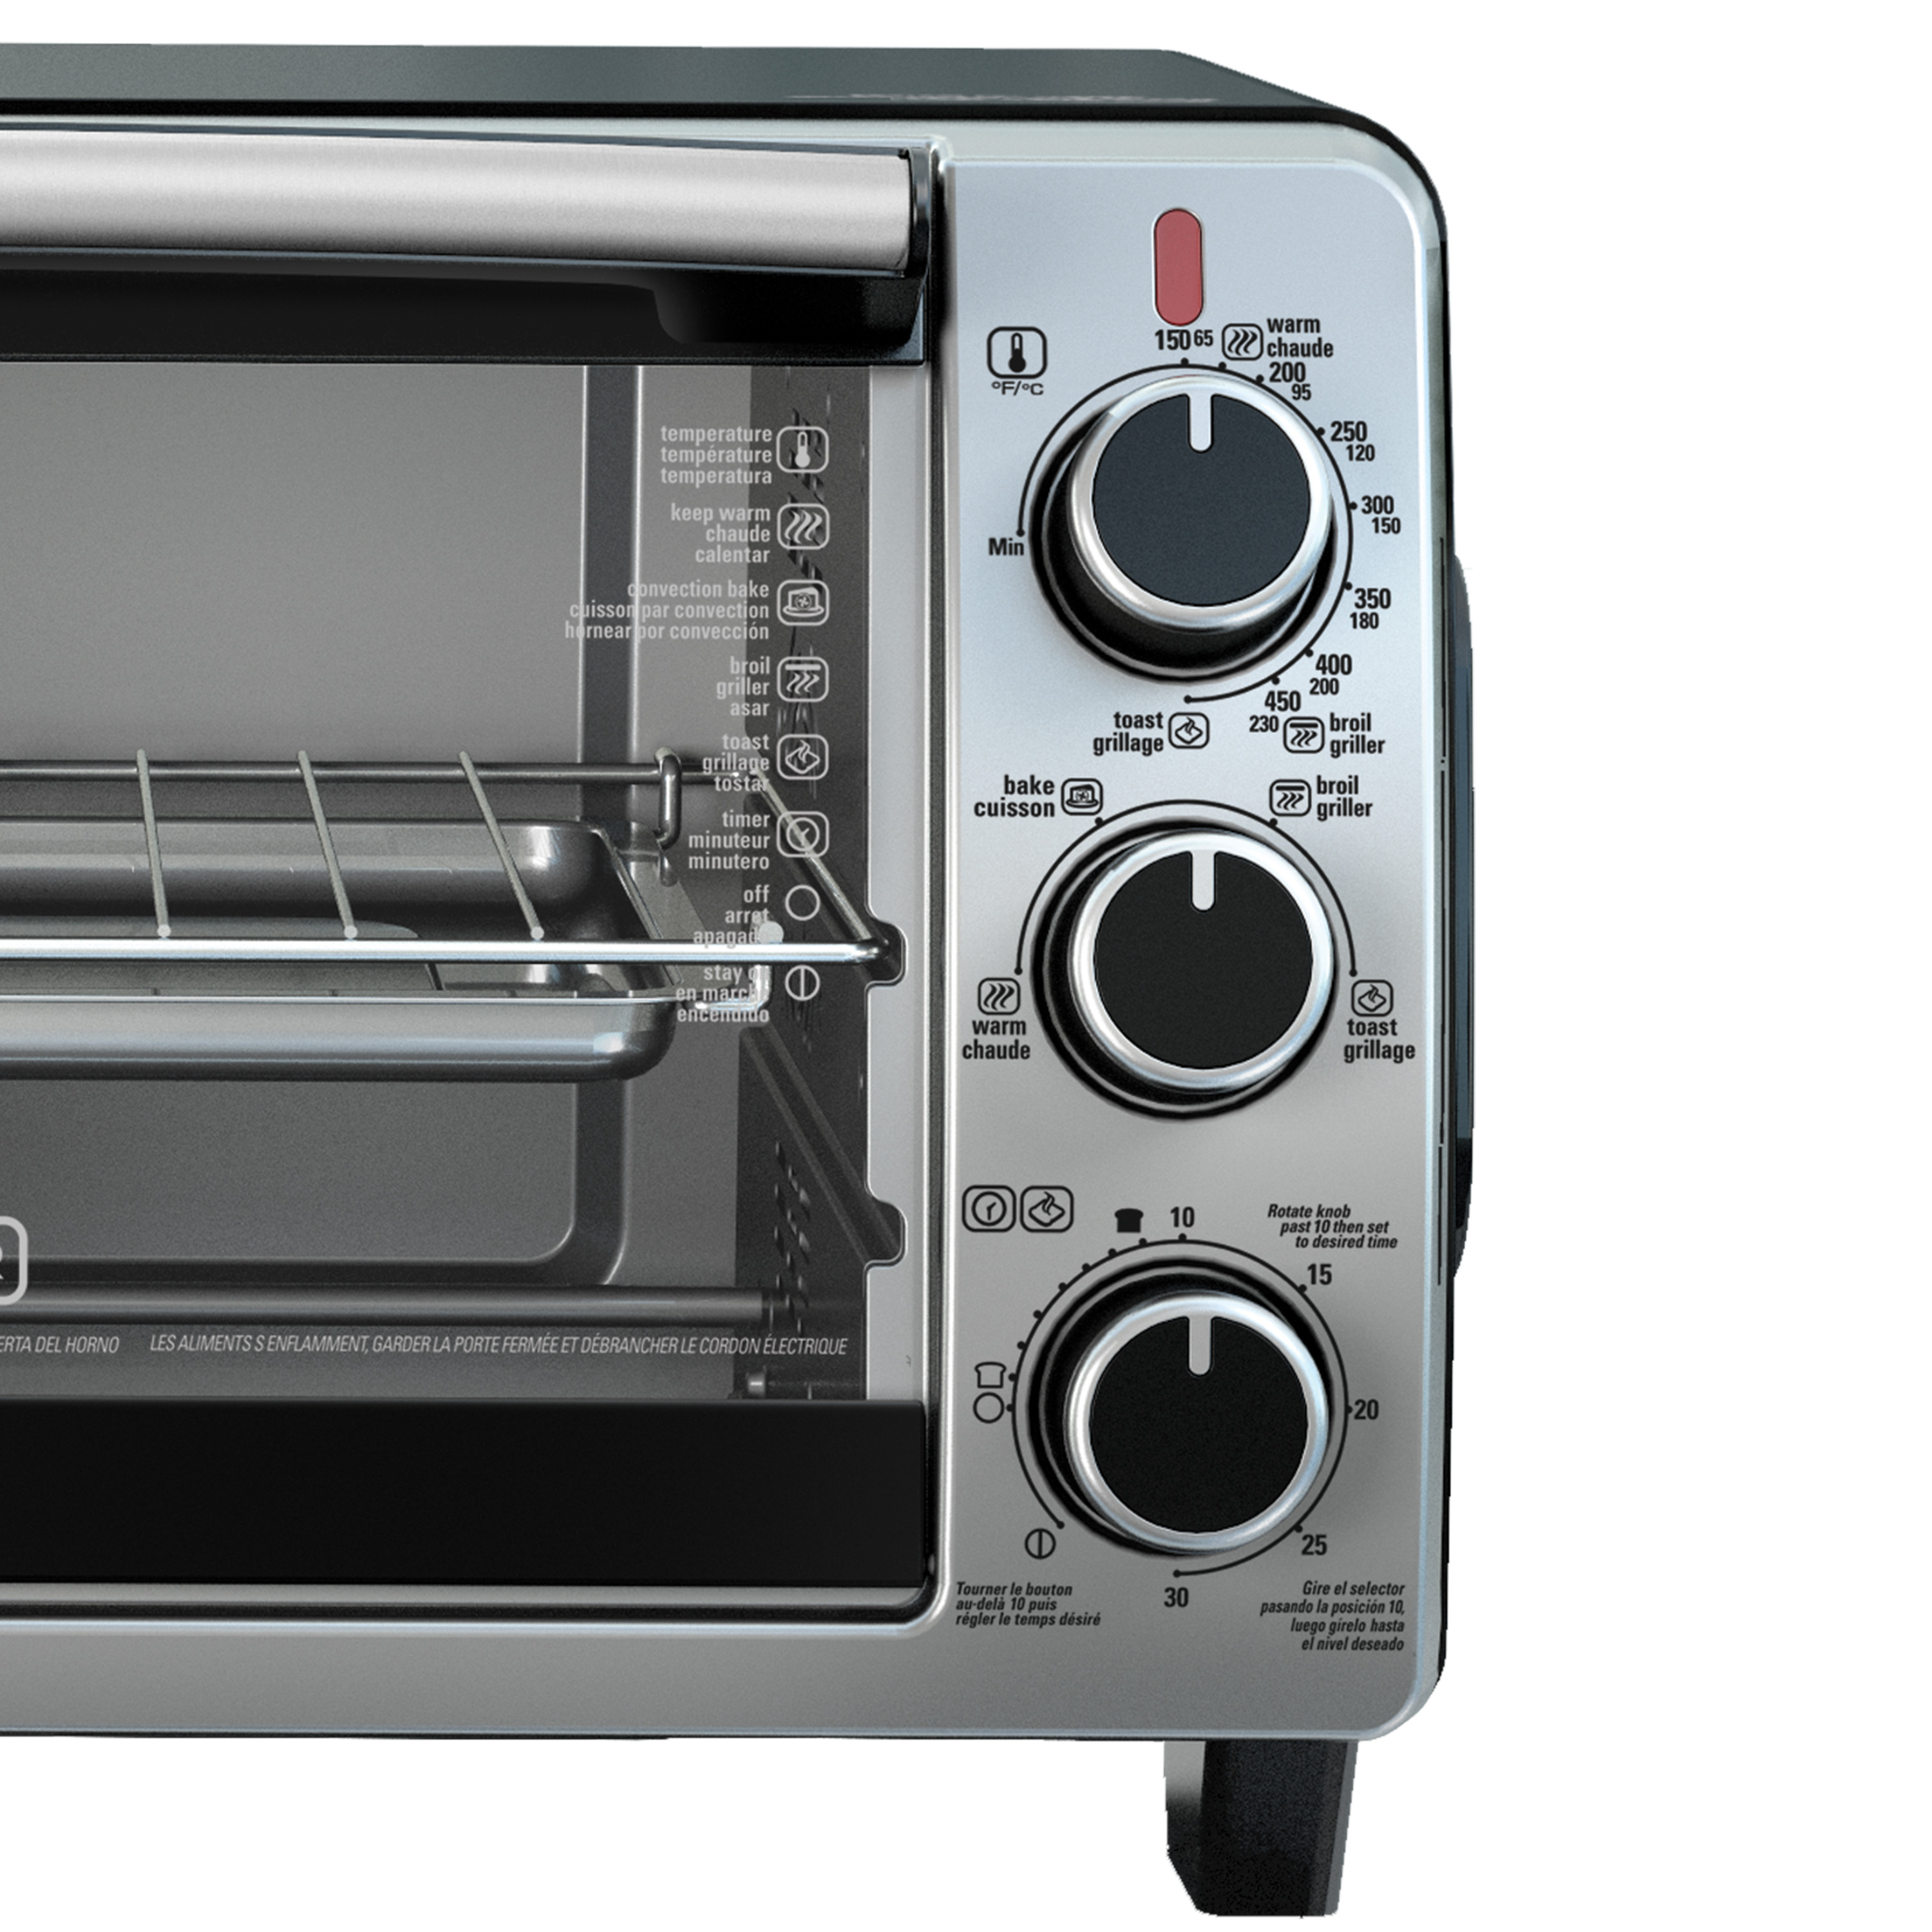 https://s7cdn.spectrumbrands.com/~/media/LatinAmerica/BlackAndDecker/Imagenes/Producto_High_Res/Cooking/ToasterOven/TO1950SBD/TO1950SBD_3.jpg